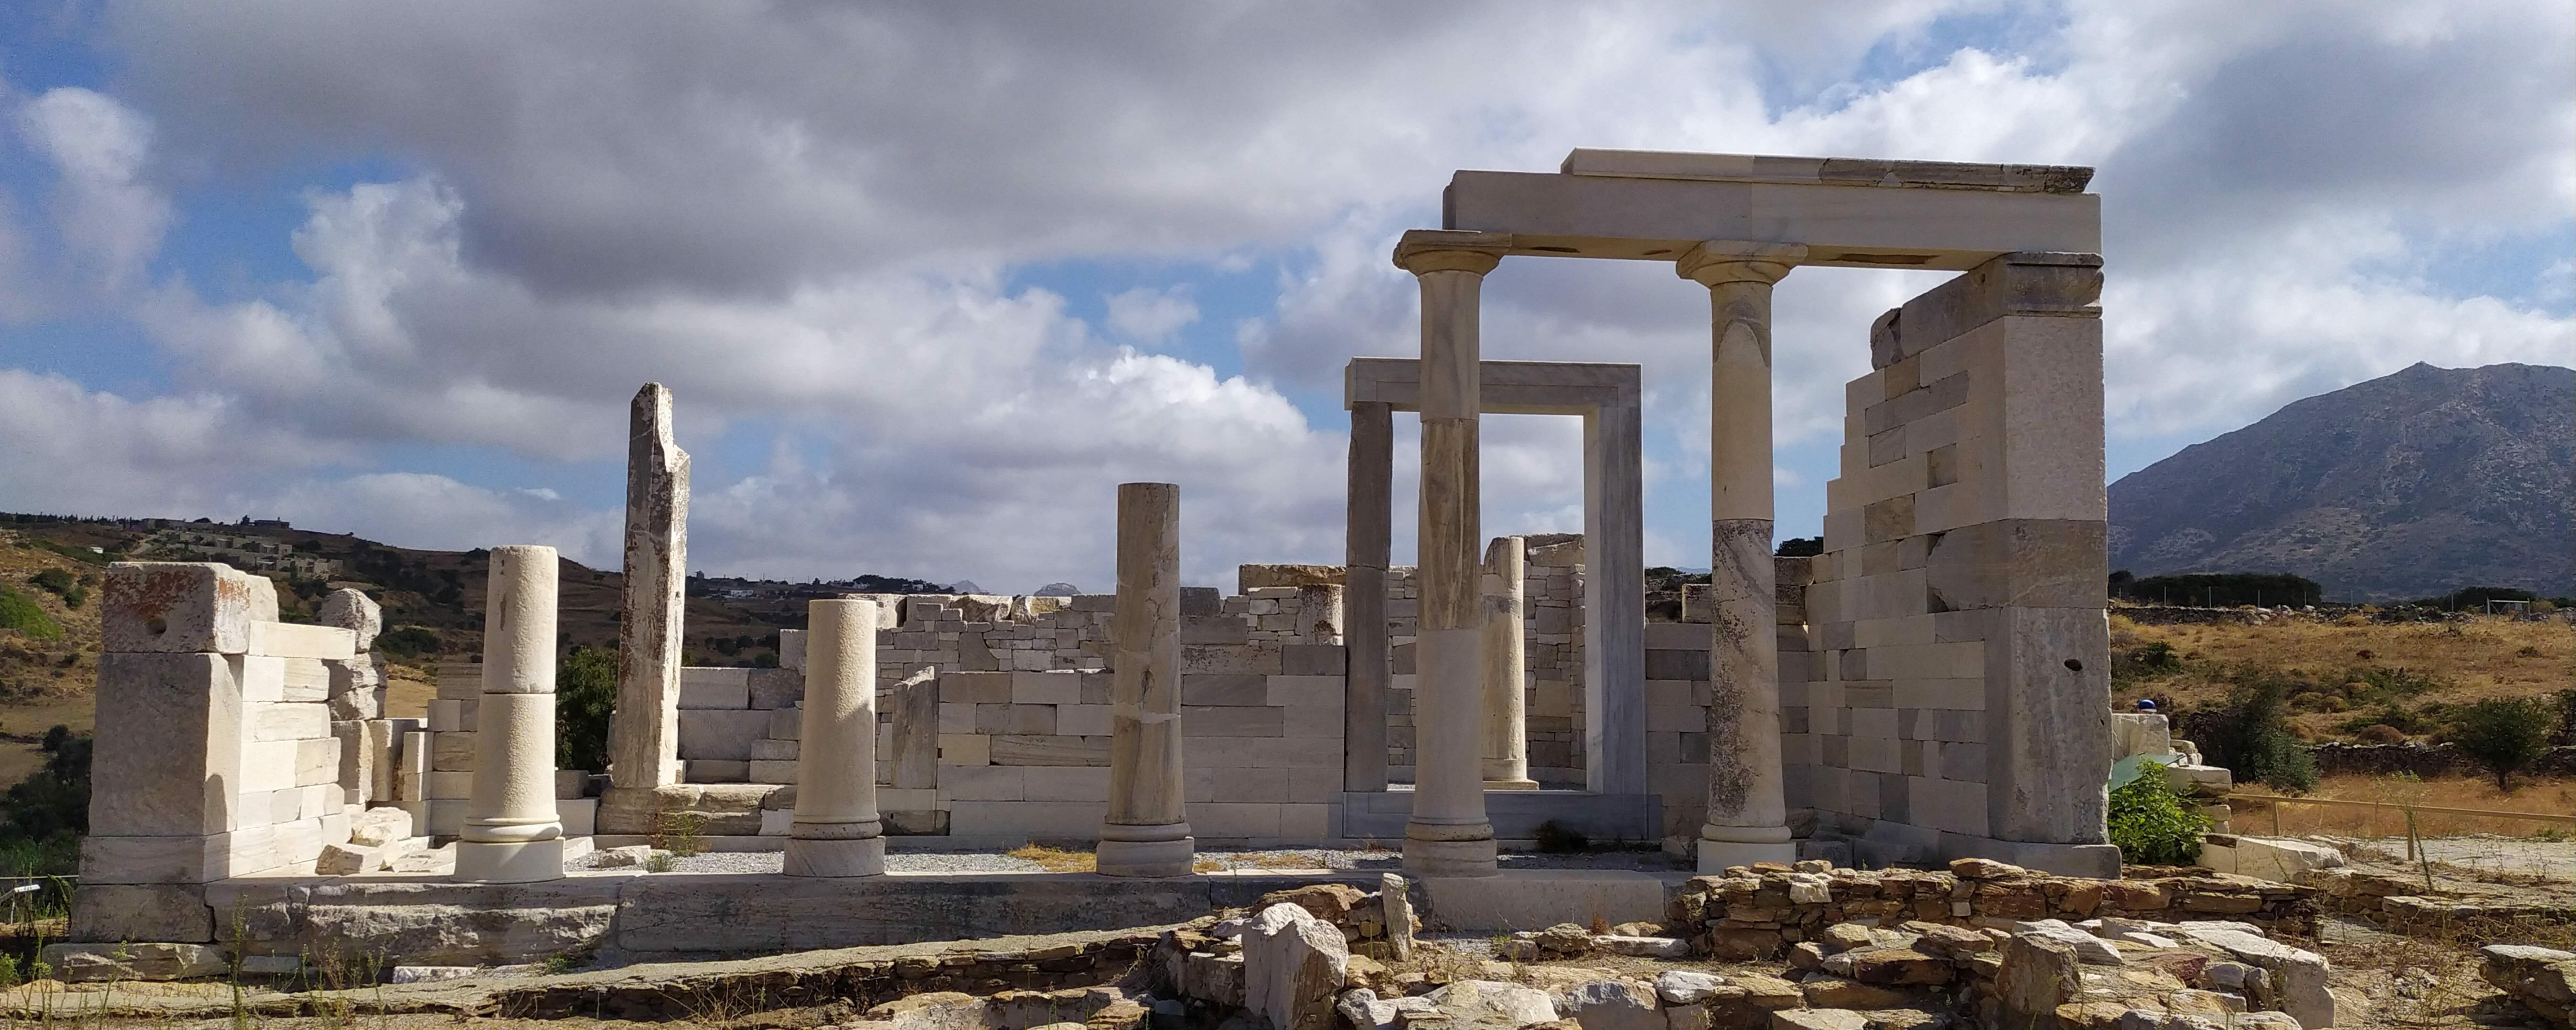 Cyclades :Naxos – The rare and impressive Archeological Temple of the Goddess Demeter